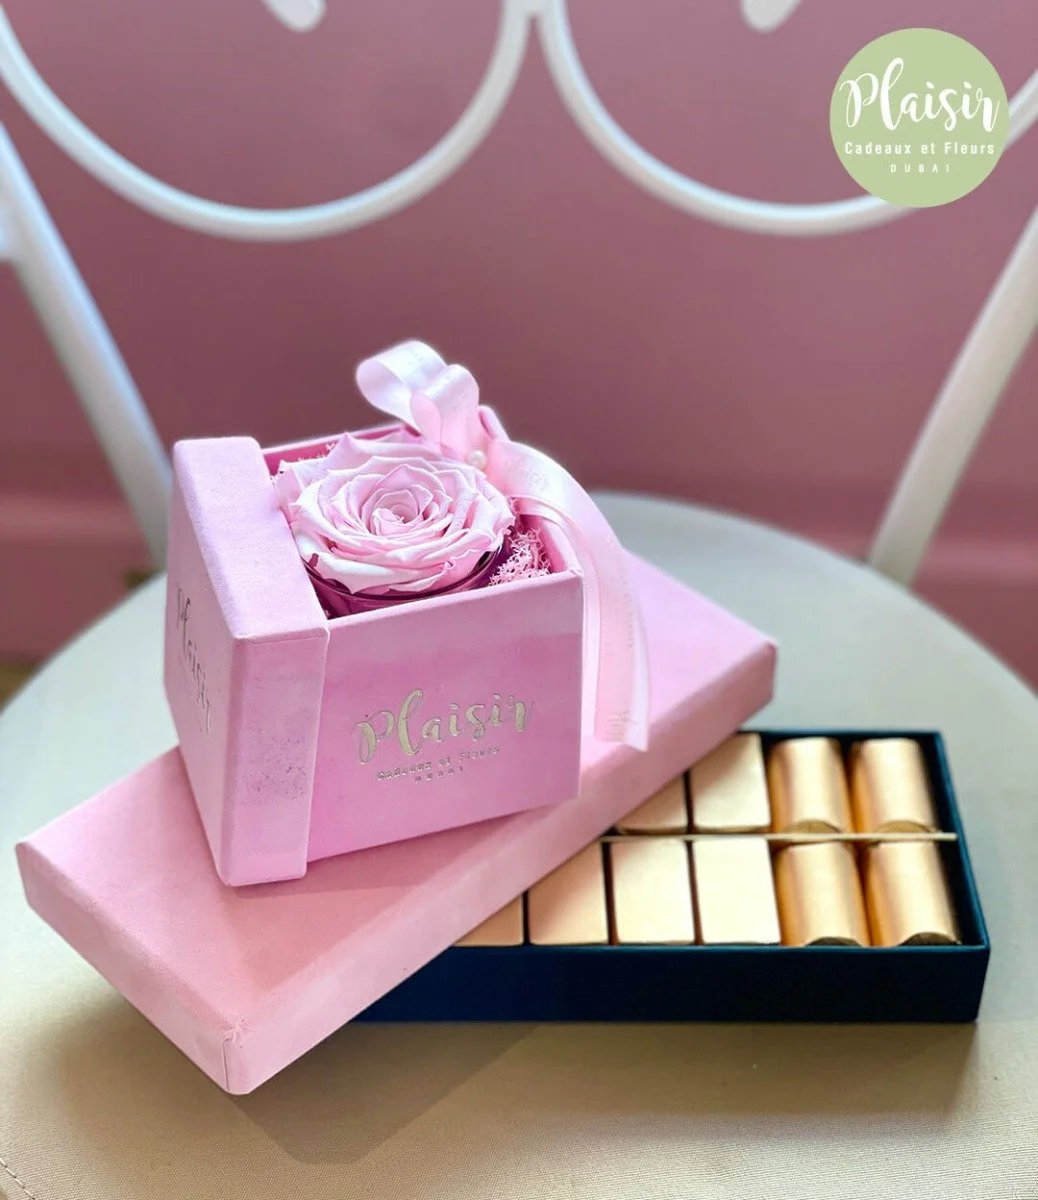 Single Infinity Rose and Patchi Chocolate Giftset in Pink by Plaisir